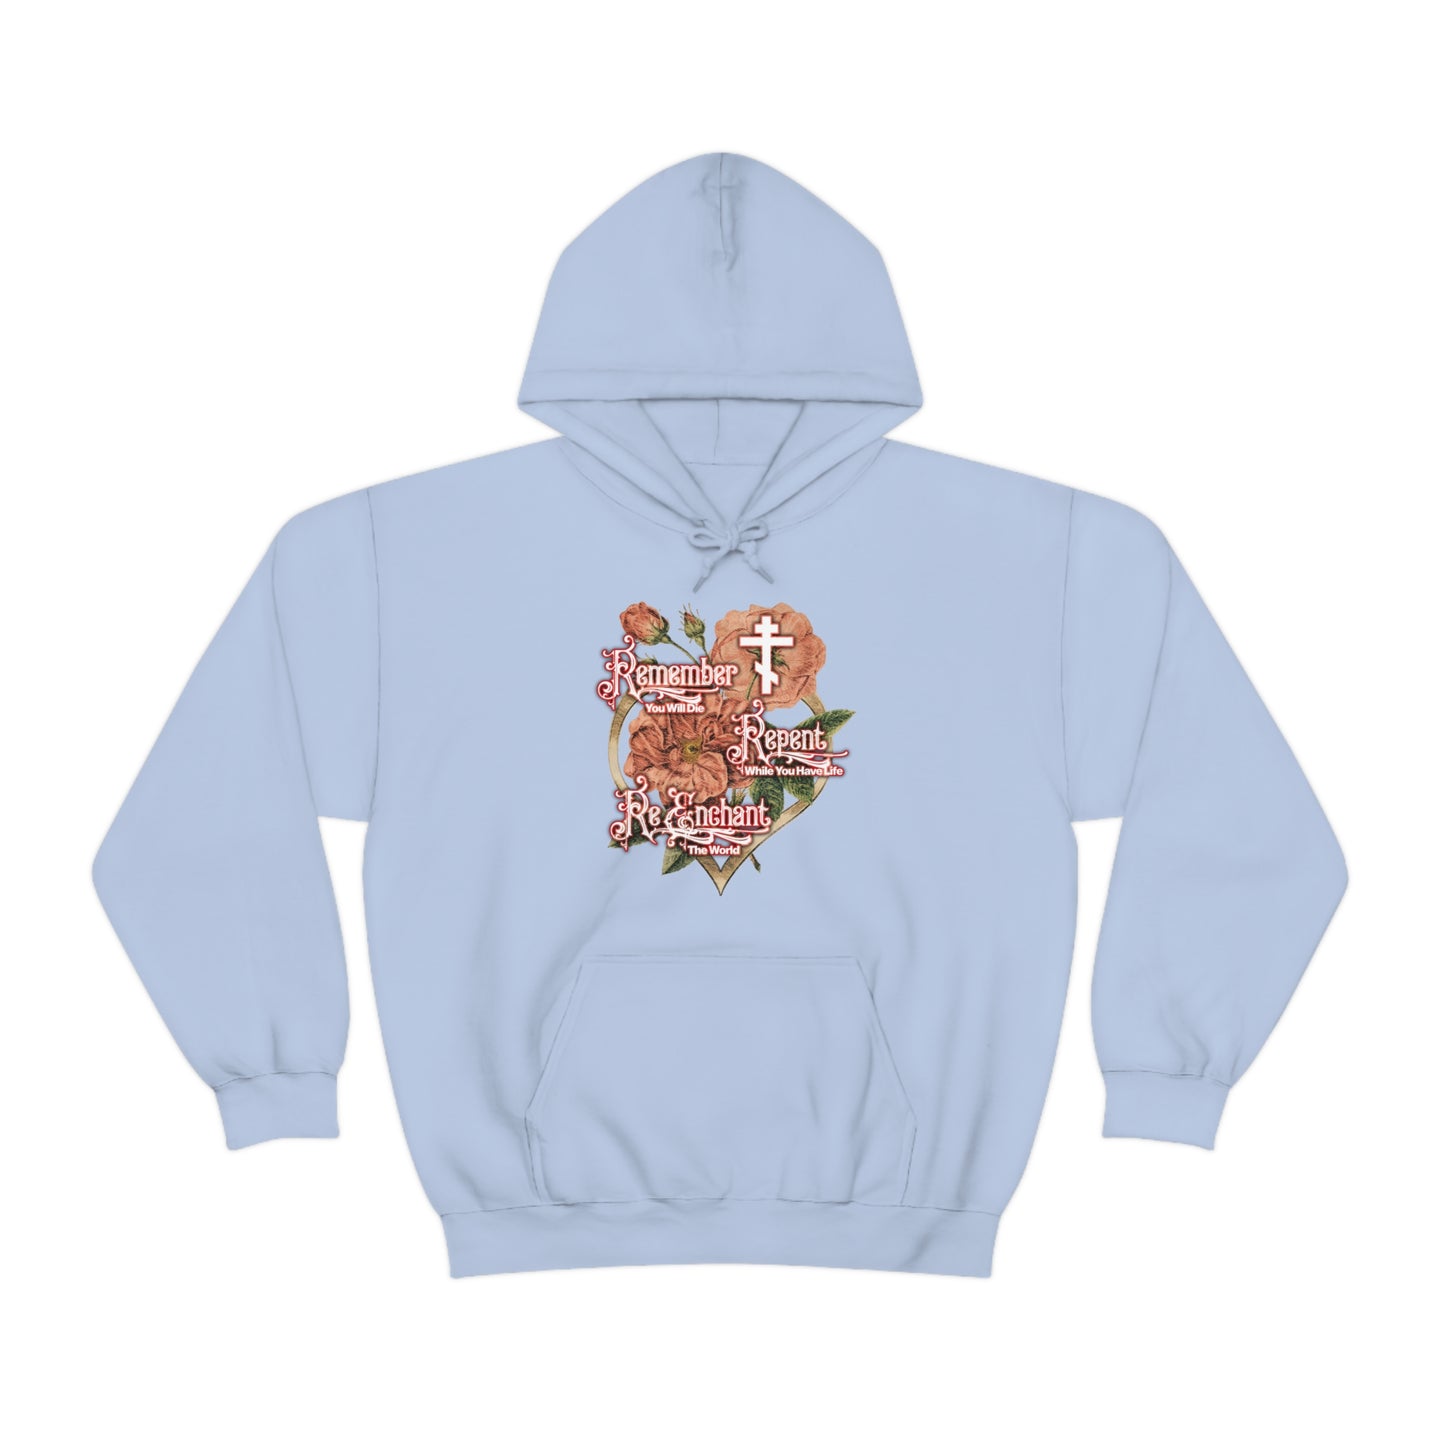 Remember Repent Re-Enchant: Victorian Design No.1a | Orthodox Christian Hoodie / Hooded Sweatshirt